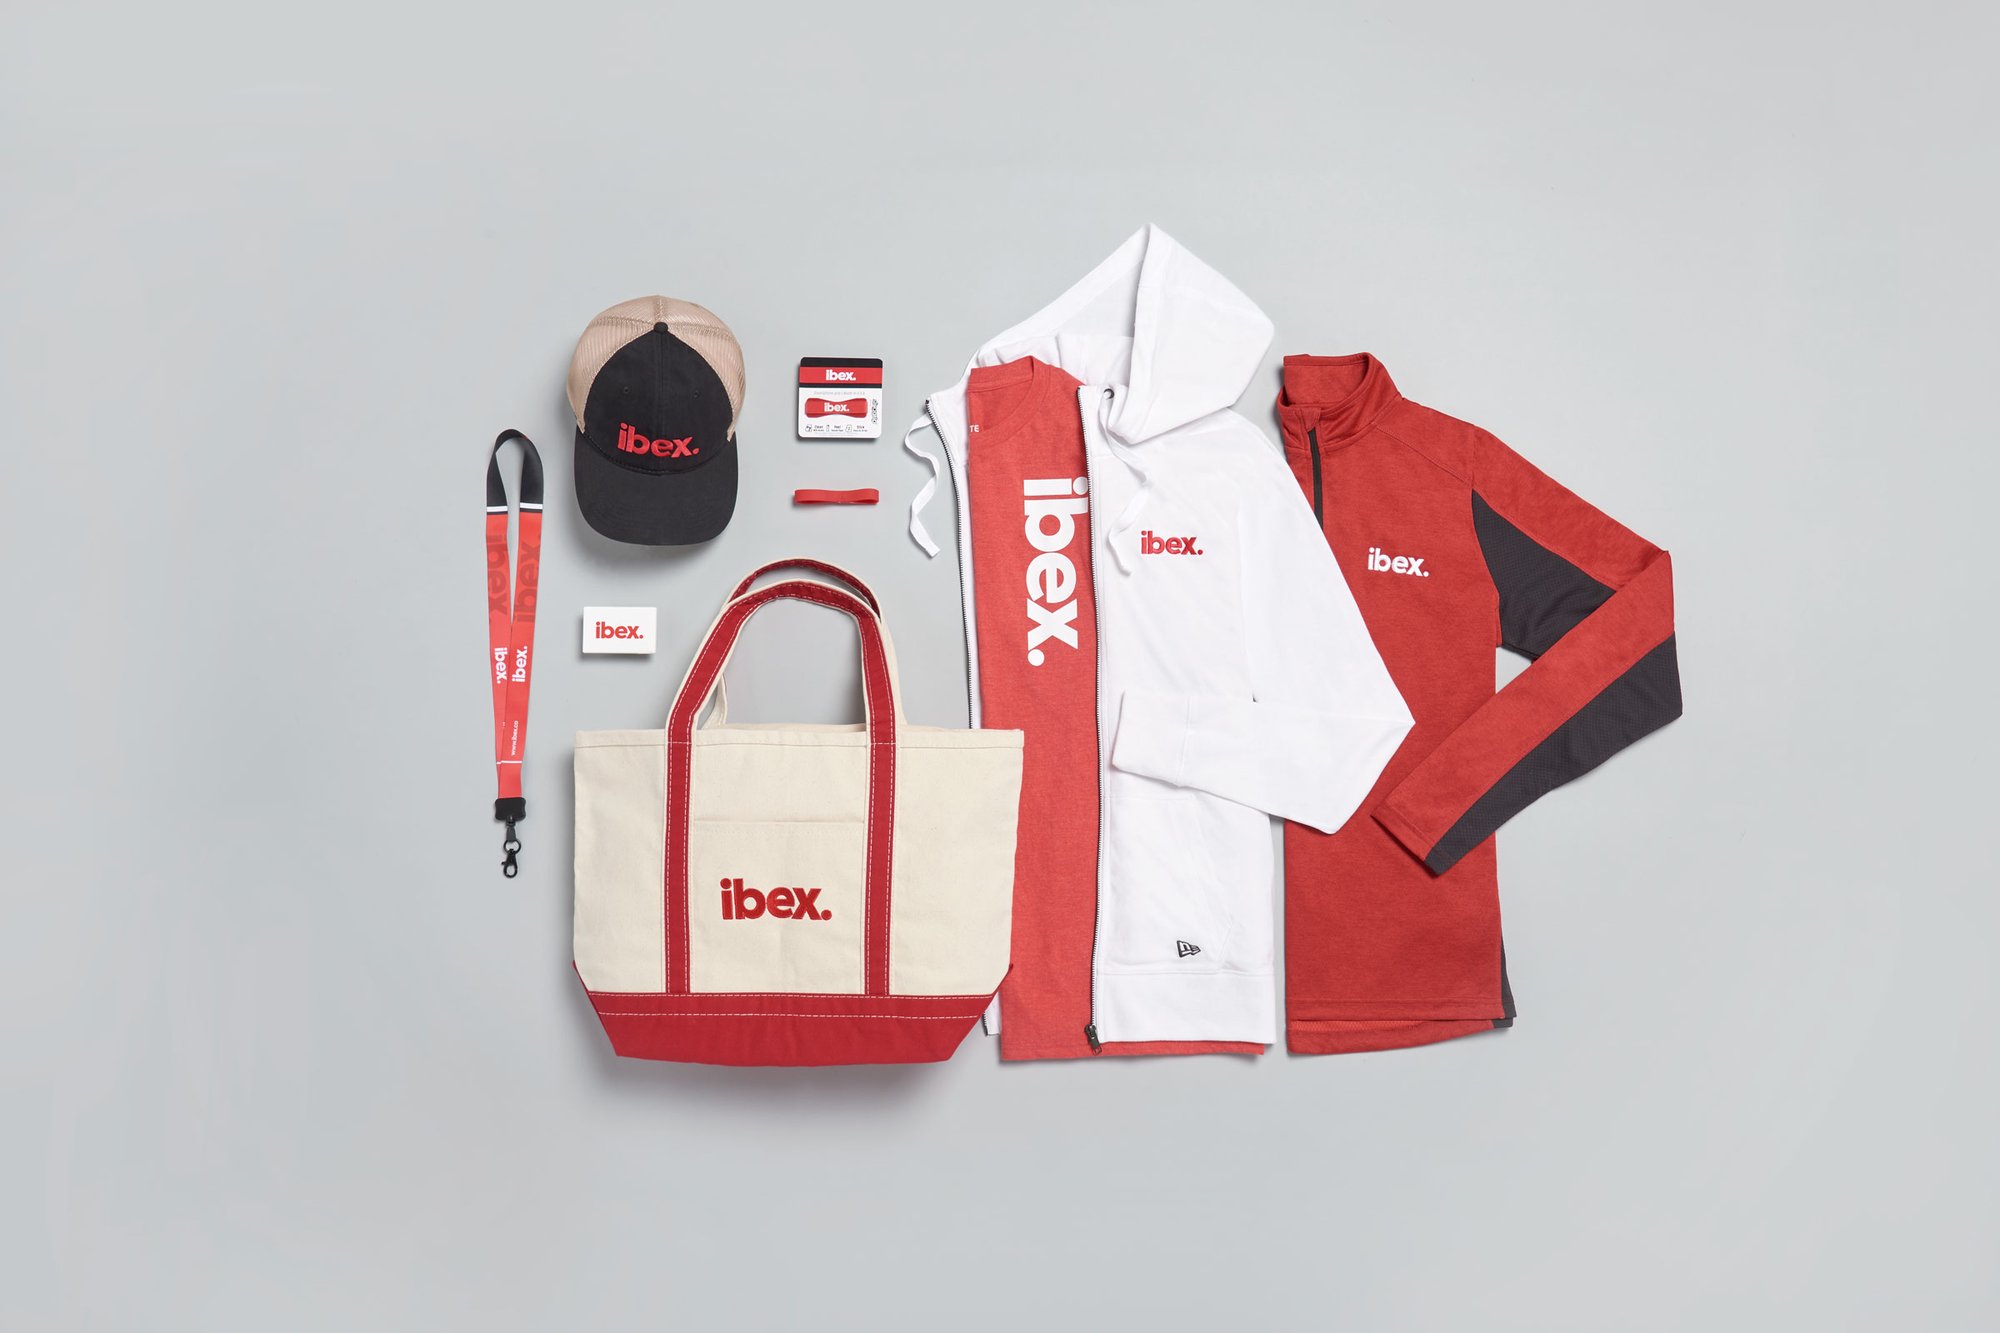 Ibex branded tote, hat, hoodie and other merch.